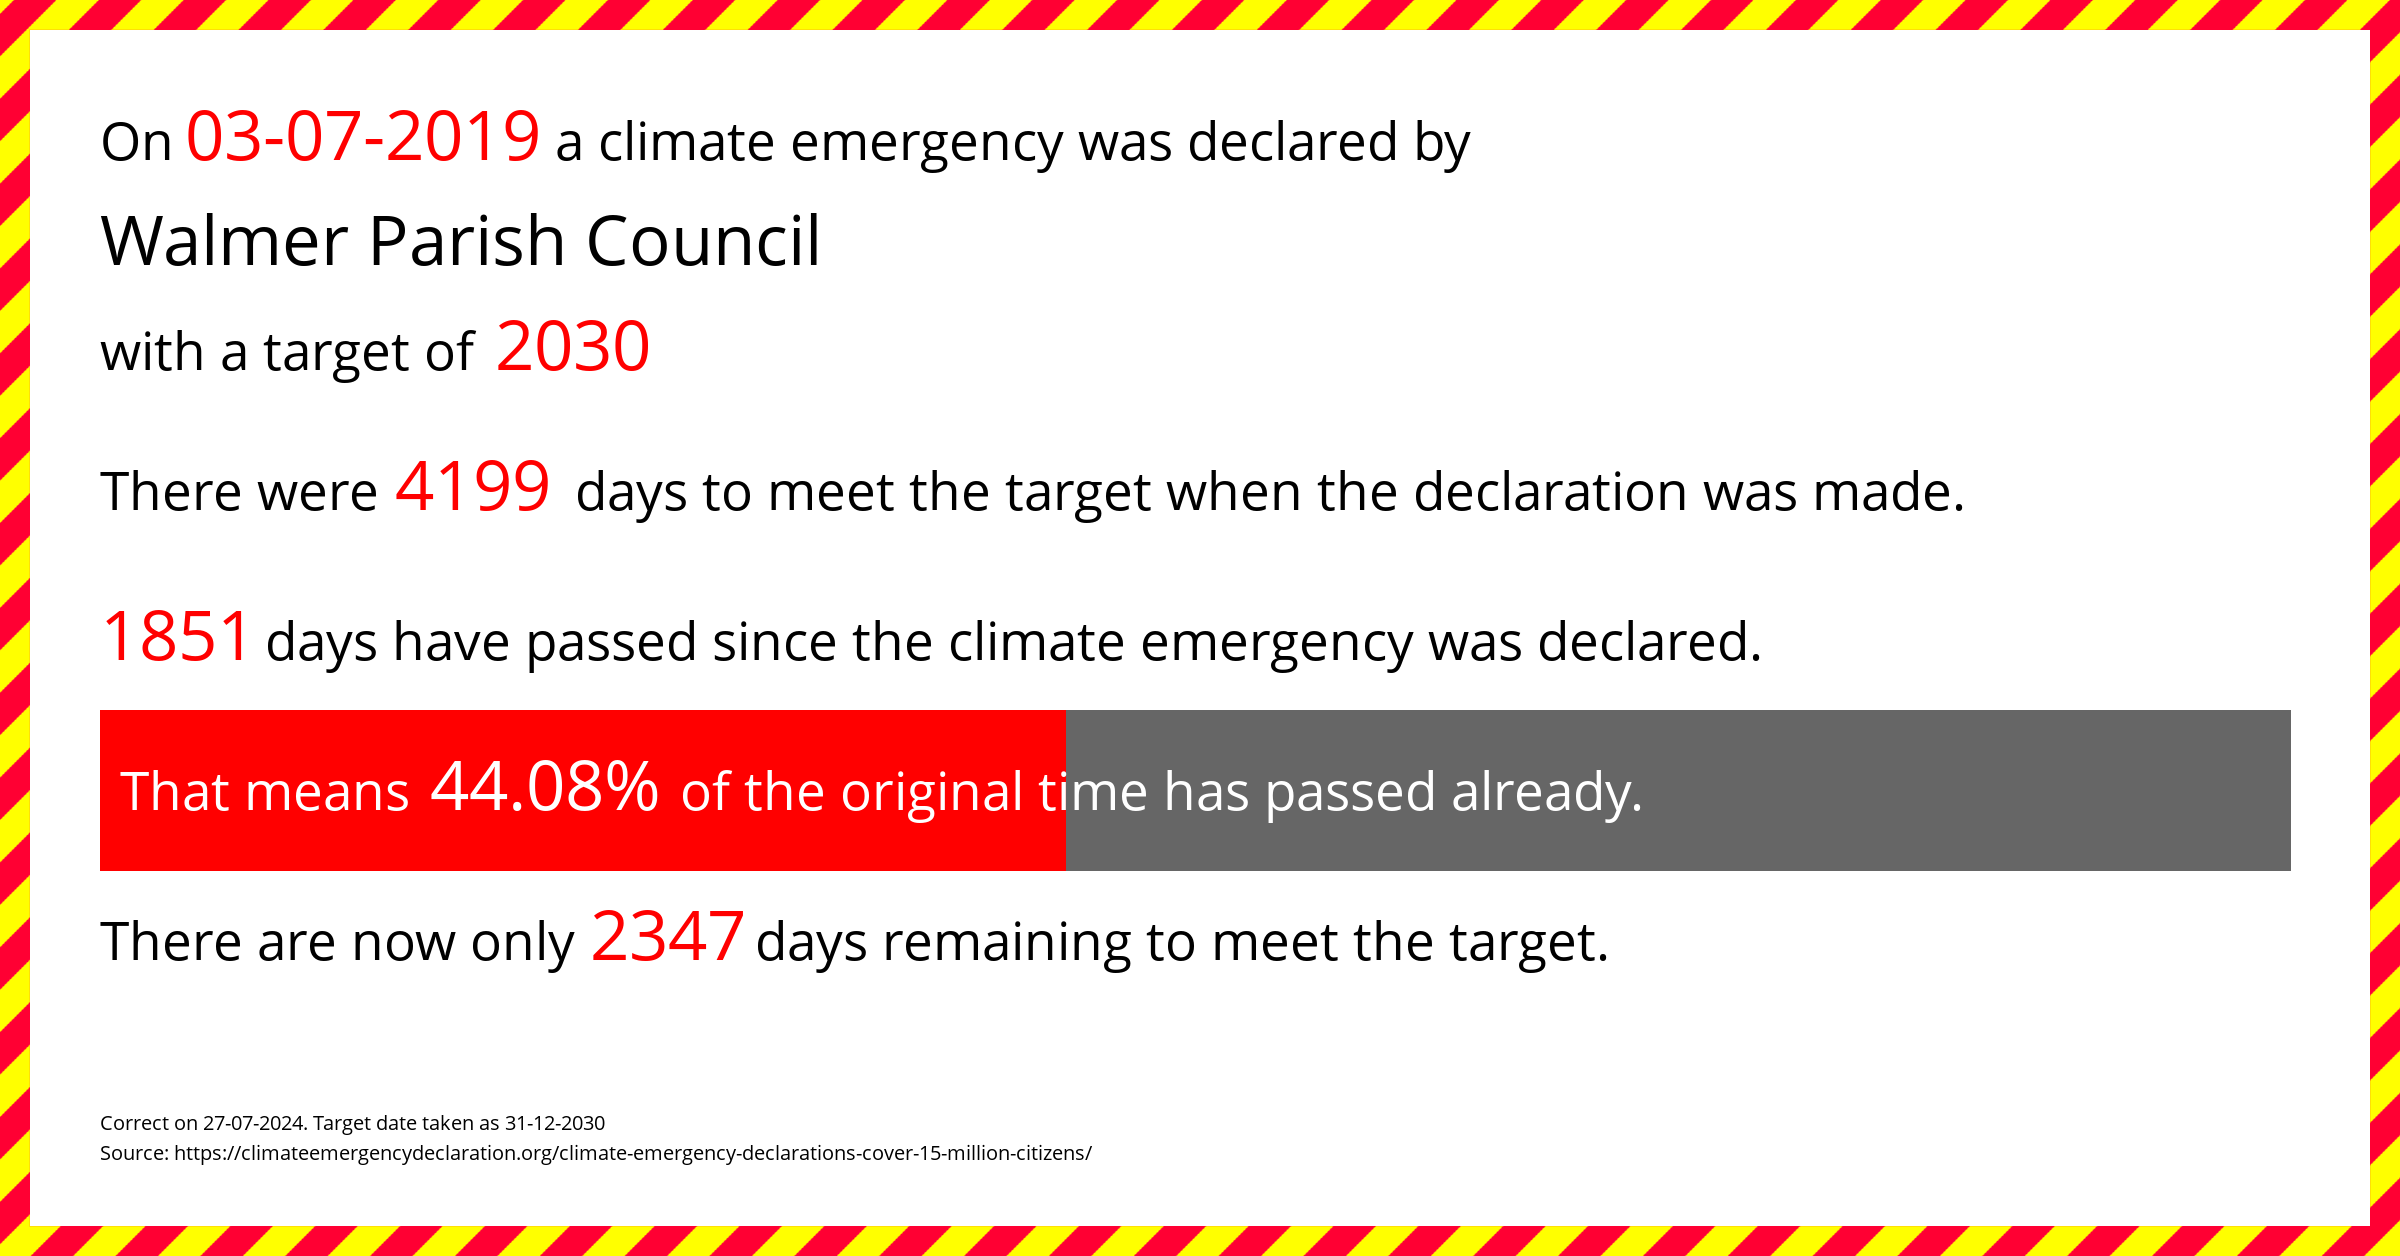 Walmer Parish Council  declared a Climate emergency on Wednesday 3rd July 2019, with a target of 2030.